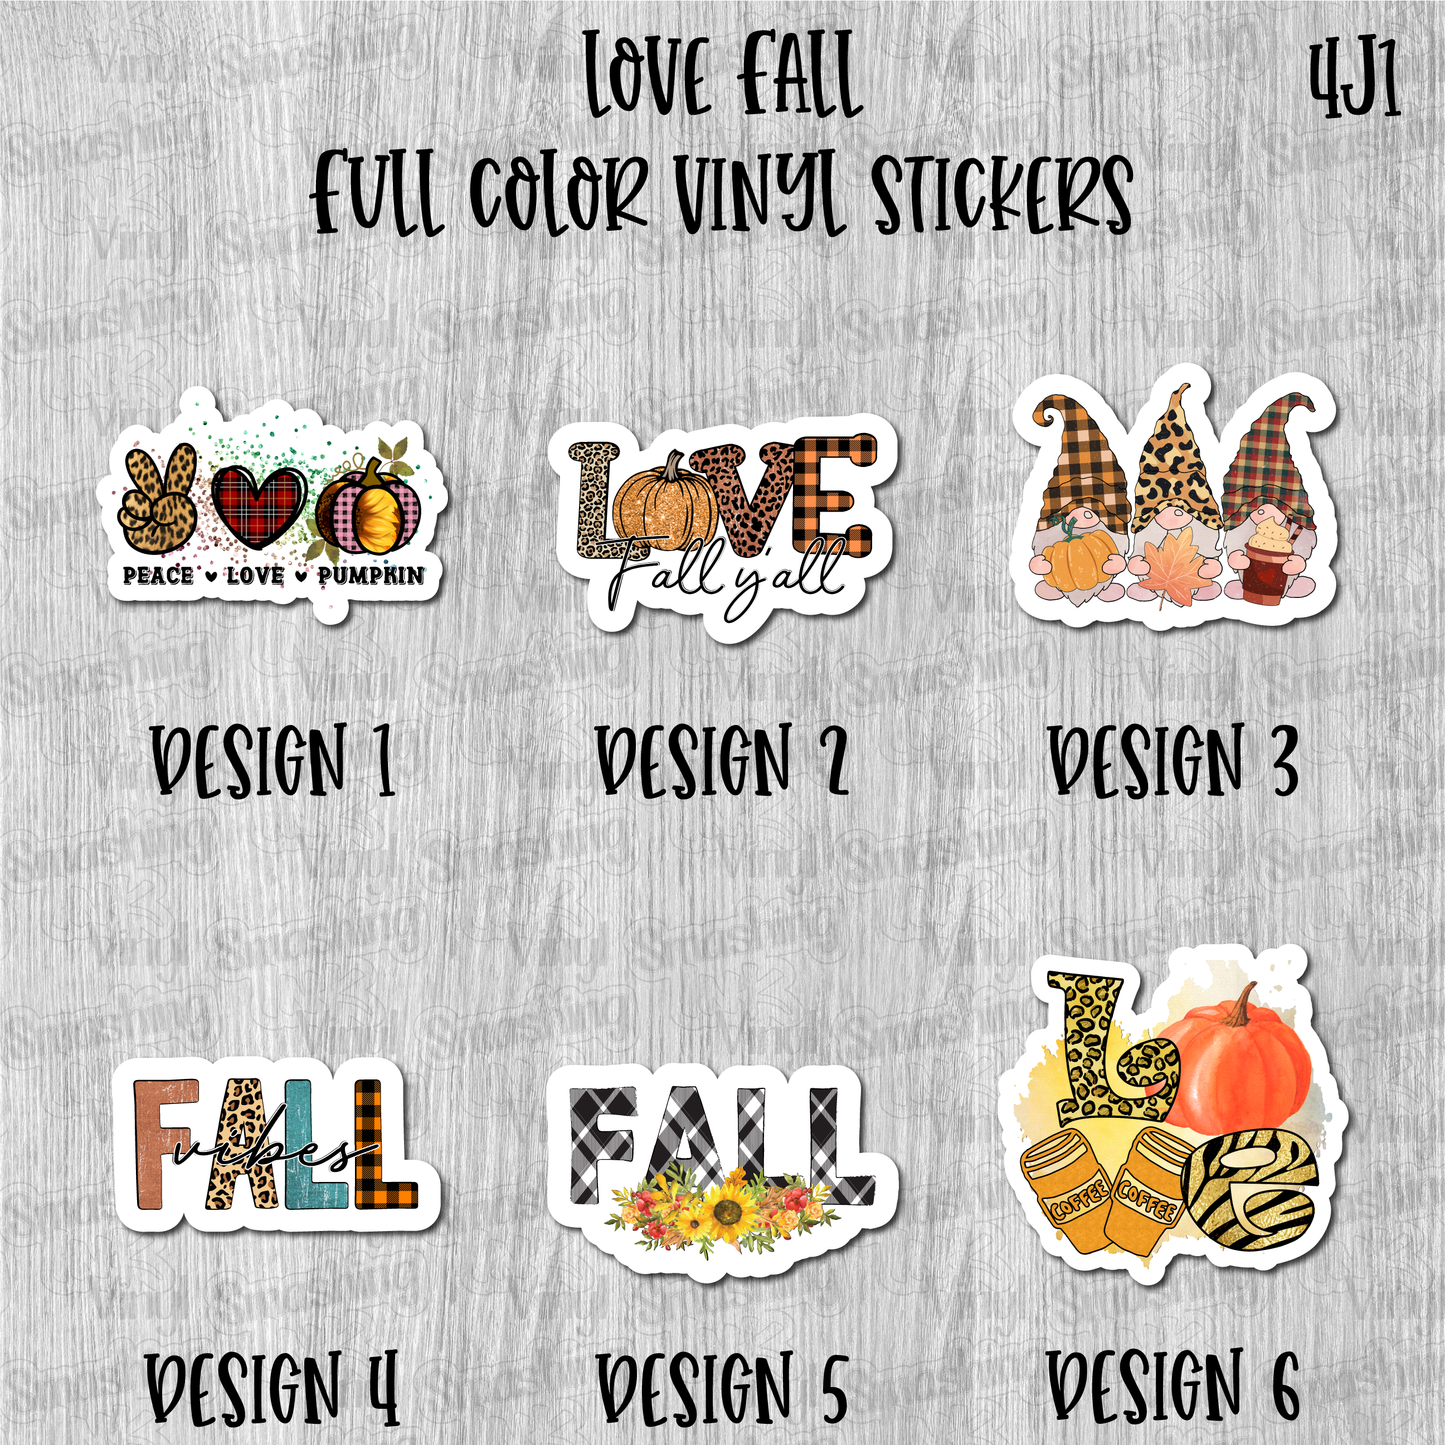 Love Fall - Full Color Vinyl Stickers (SHIPS IN 3-7 BUS DAYS)